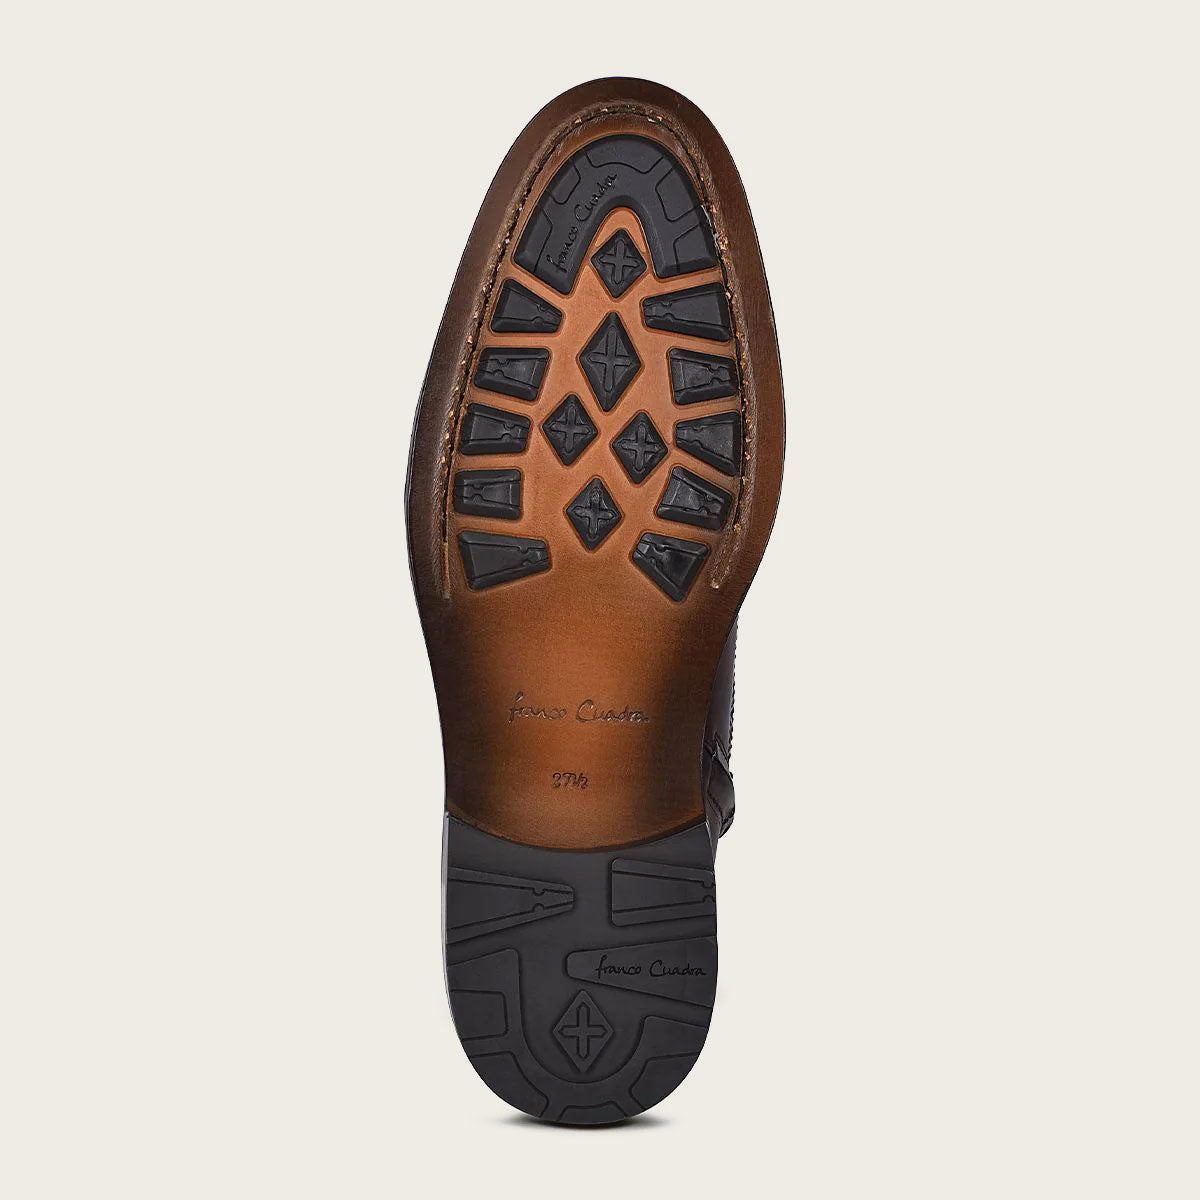 Brown leather men loafer, cayman leather - 2D5CWTS - Cuadra Shop